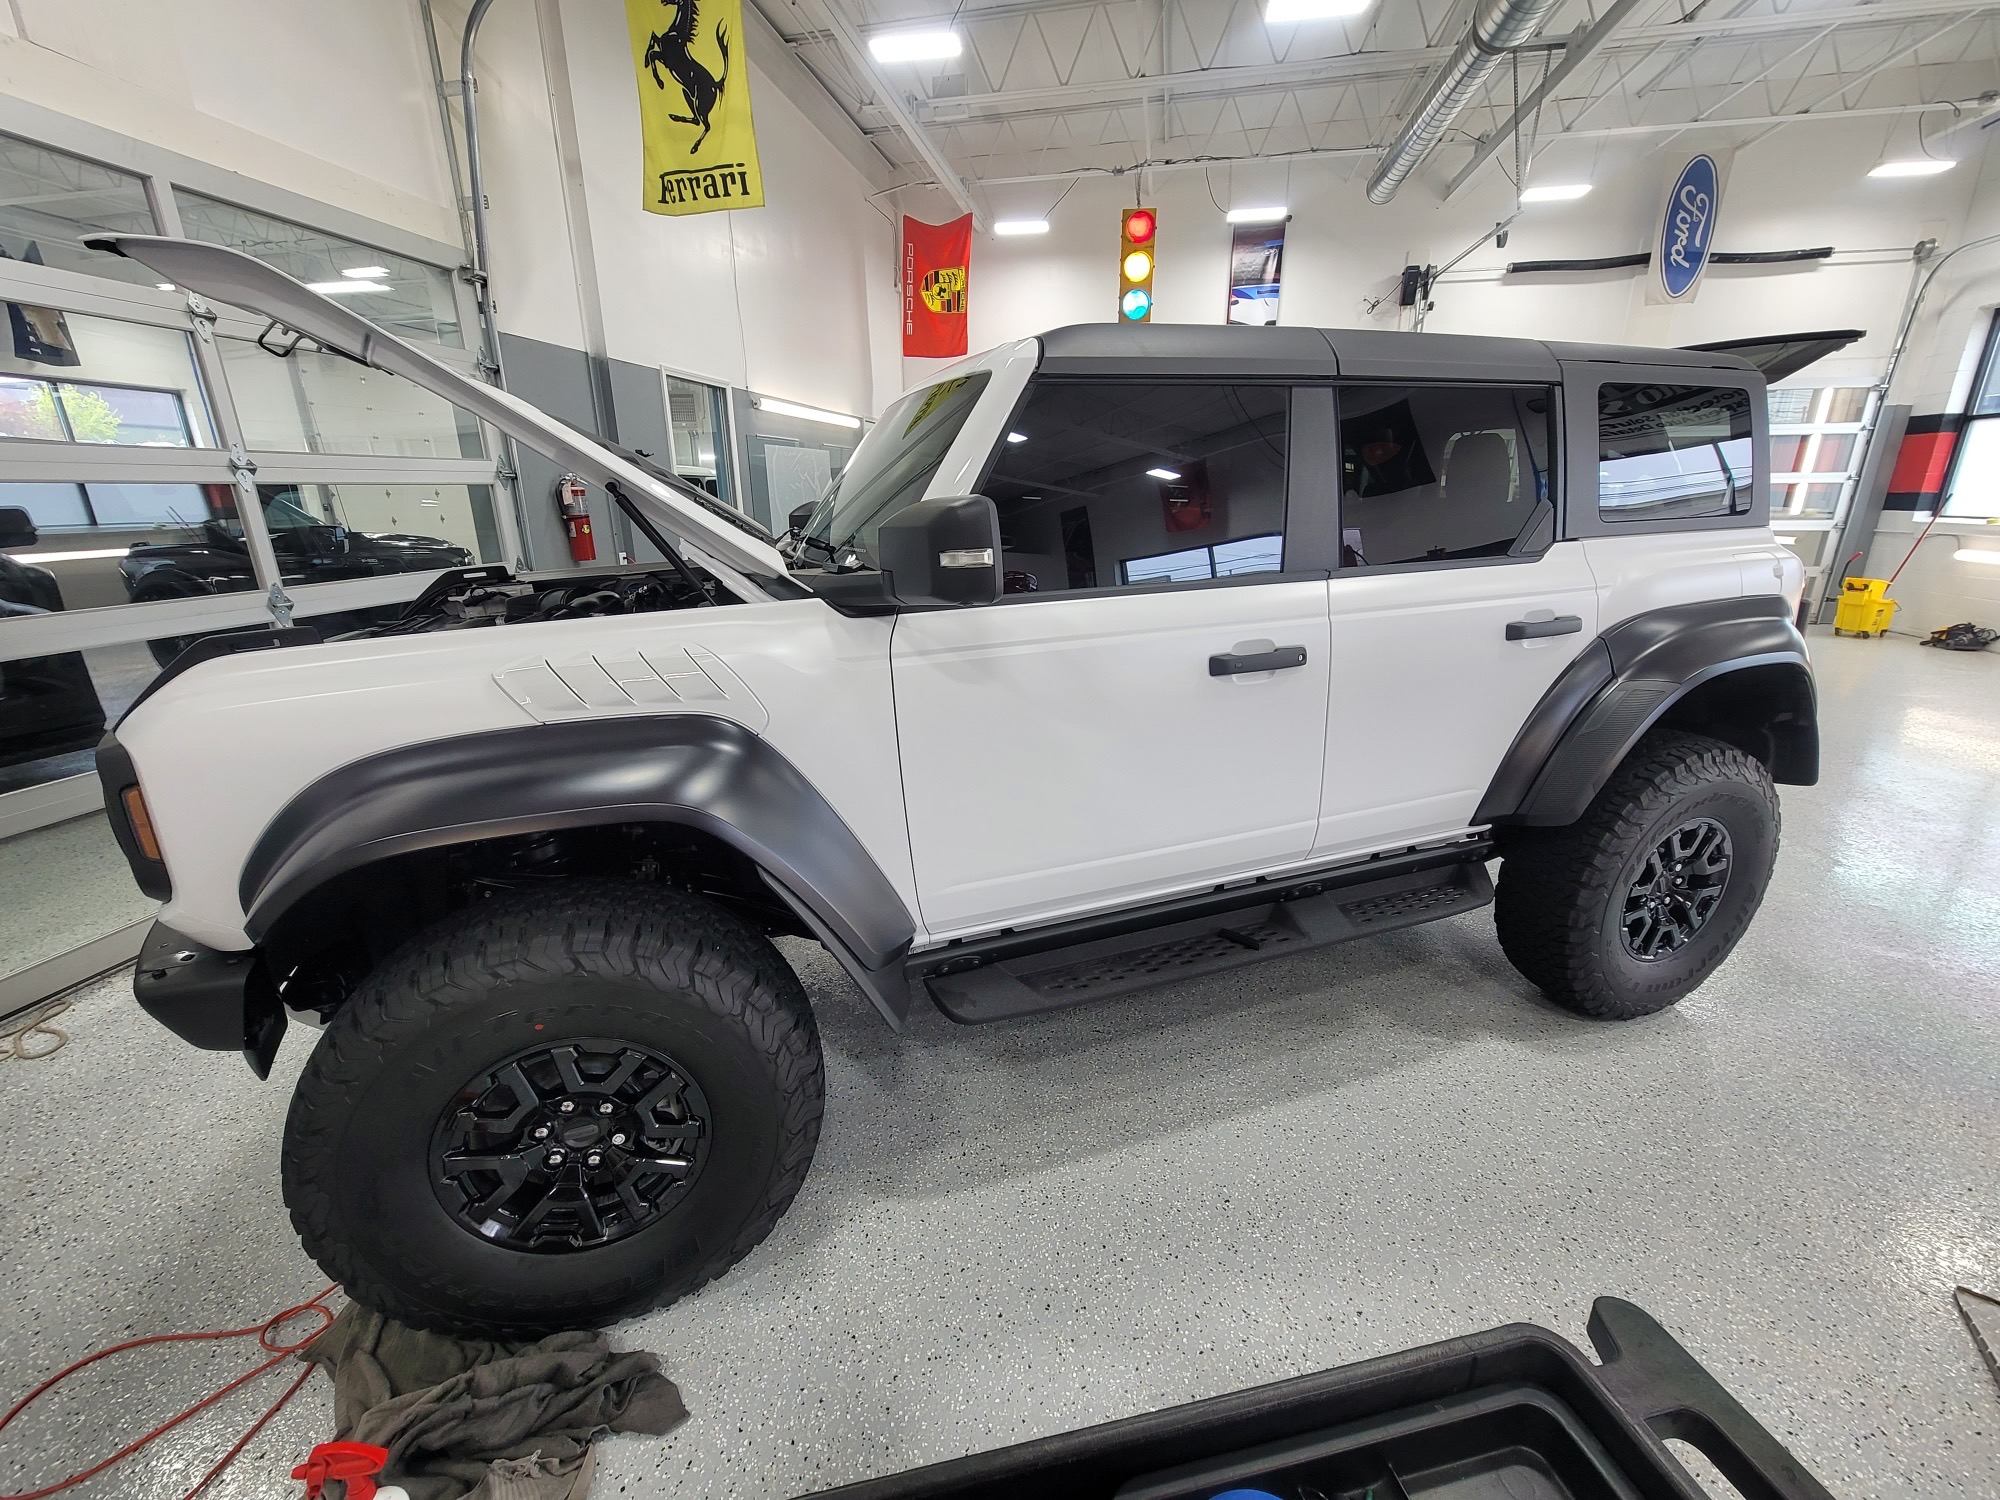 Ford Bronco XPEL Stealth PPF Wrap Completed on Bronco Raptor in Oxford White Resized_20230502_133730